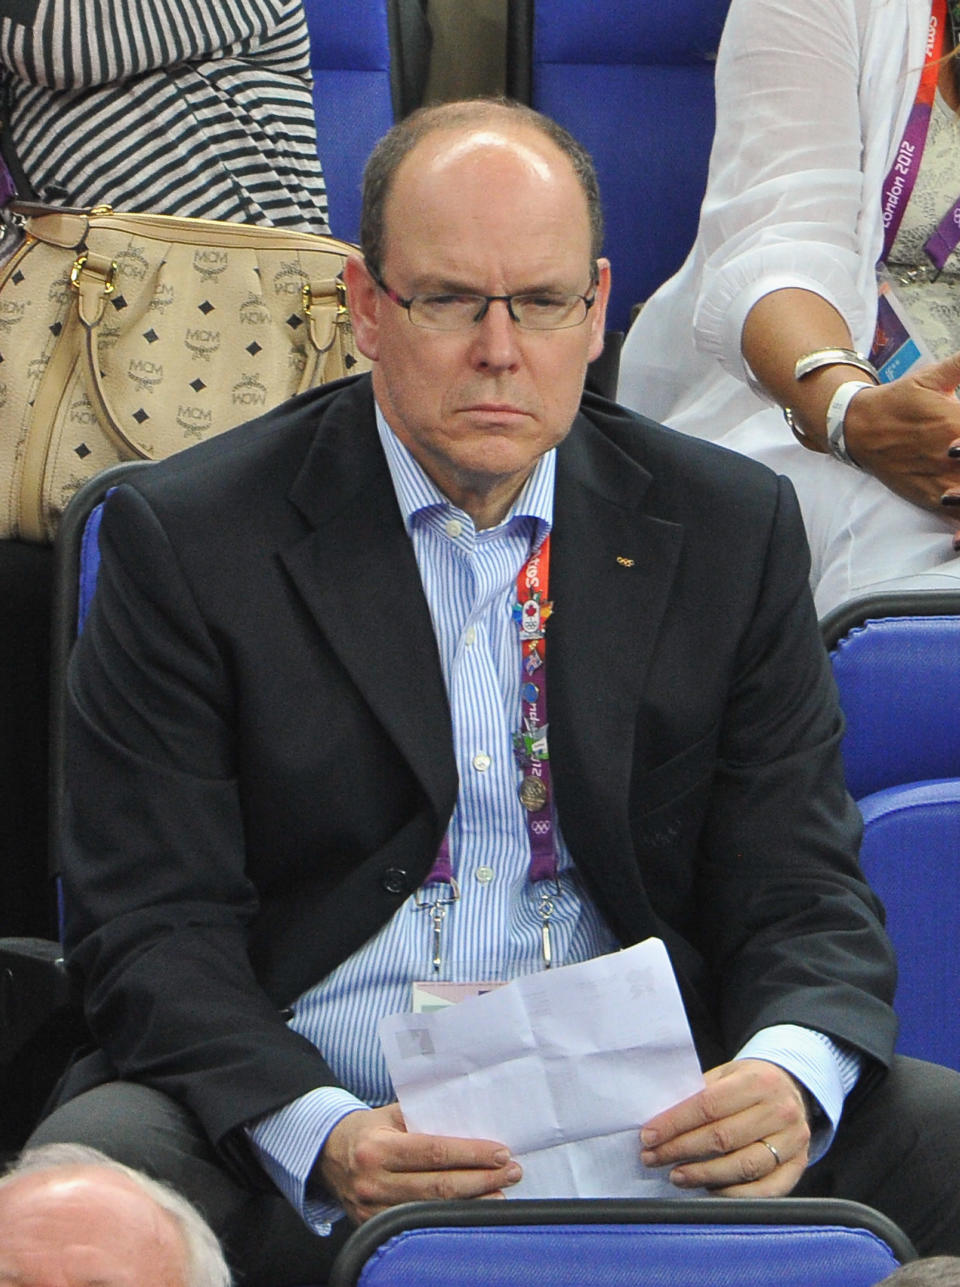 LONDON, ENGLAND - AUGUST 12: Prince Albert II of Monaco during the Men's Basketball gold medal game between the United States and Spain on Day 16 of the London 2012 Olympics Games at North Greenwich Arena on August 12, 2012 in London, England. (Photo by Pascal Le Segretain/Getty Images)